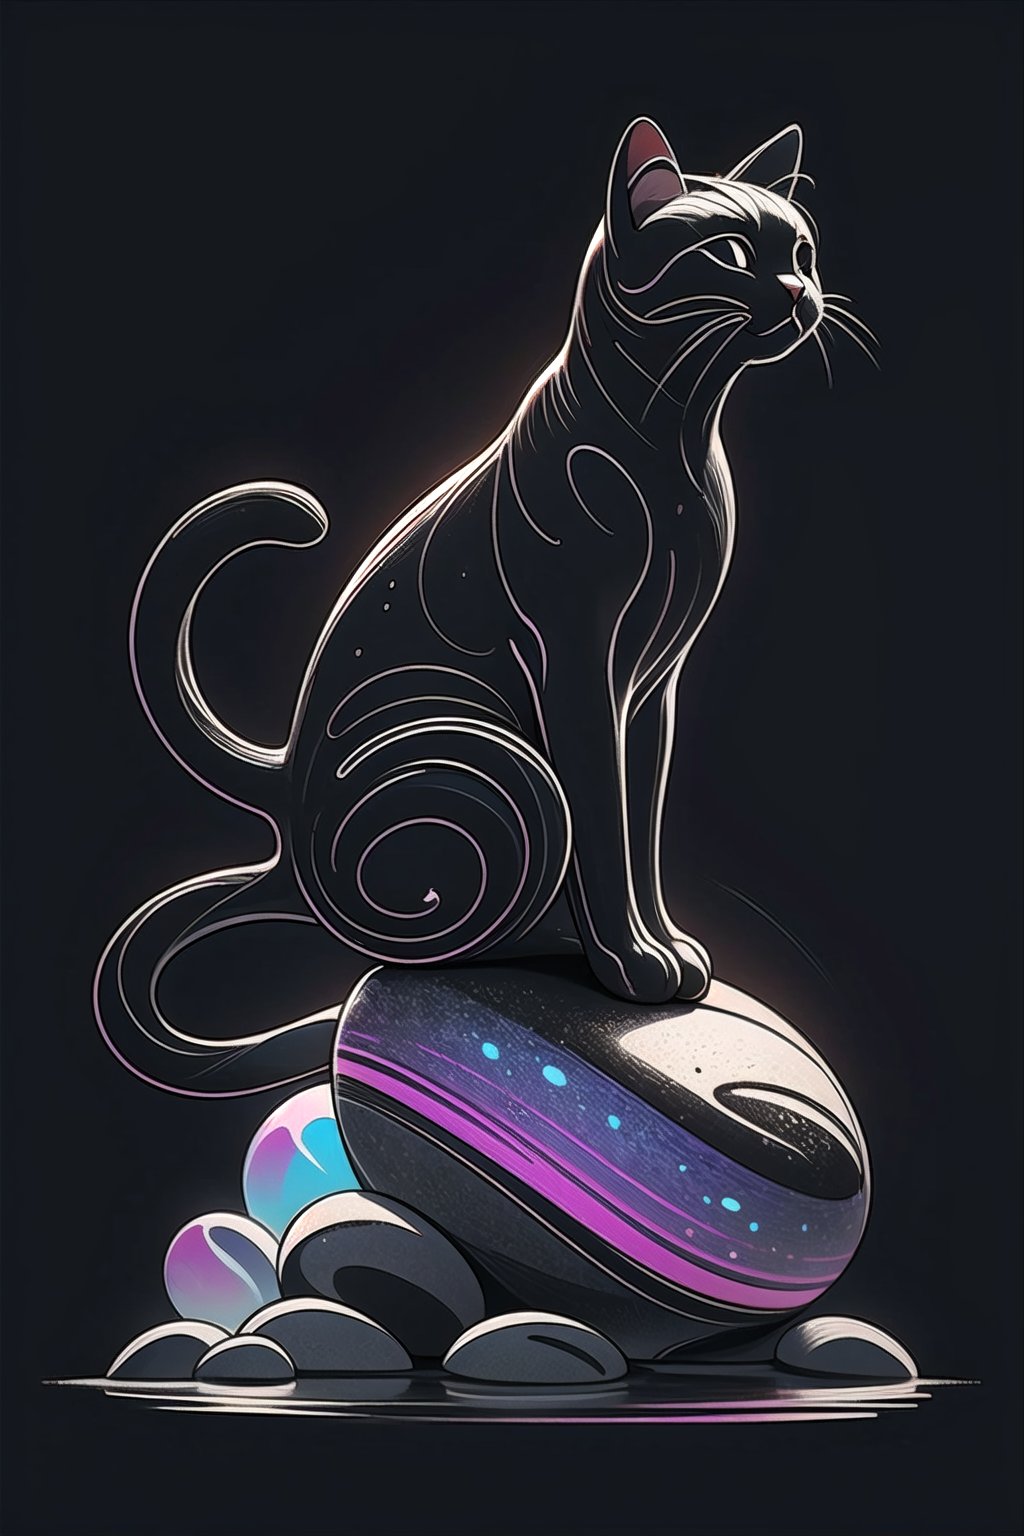 cat, rock, neon, abstract, psychedelic, surreal elements, black background
,SmpSk,Slhtte